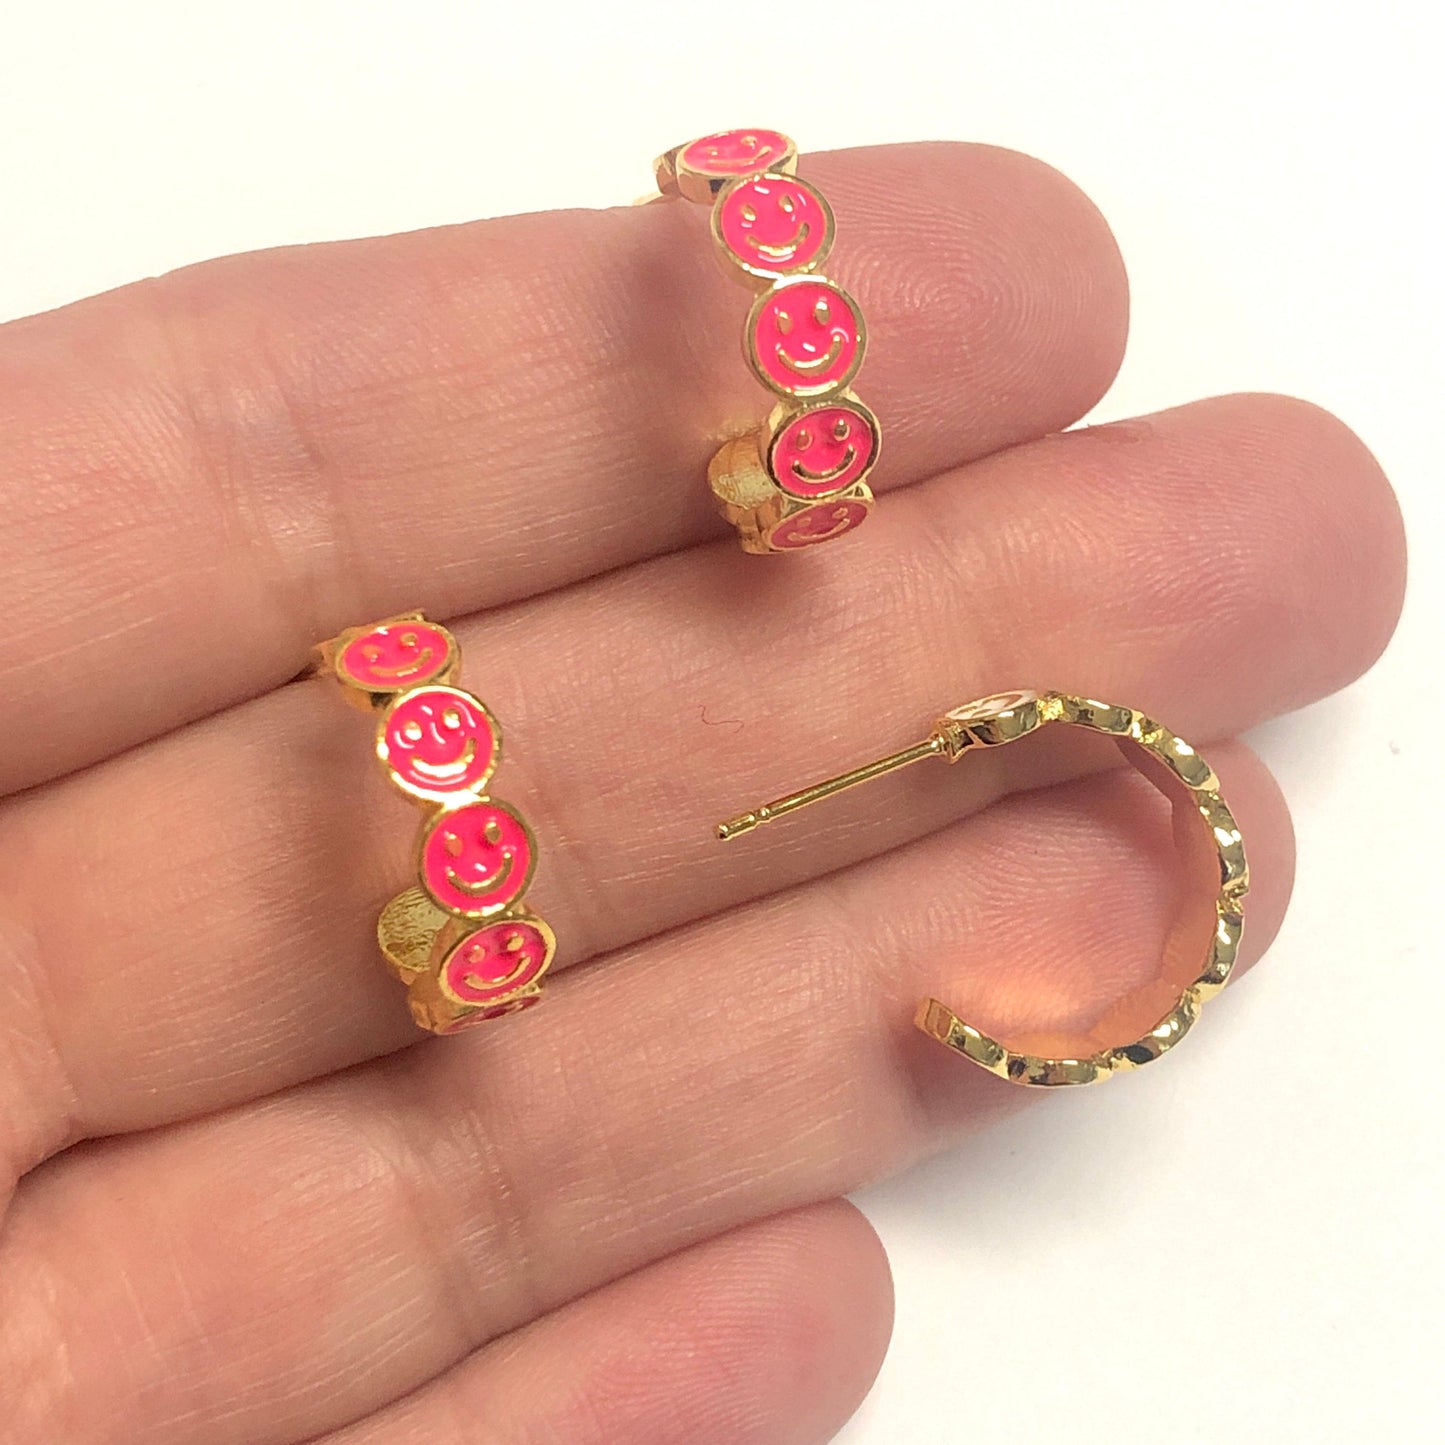 Gold Plated Enamel Smiling Face Earrings - Neon Pink